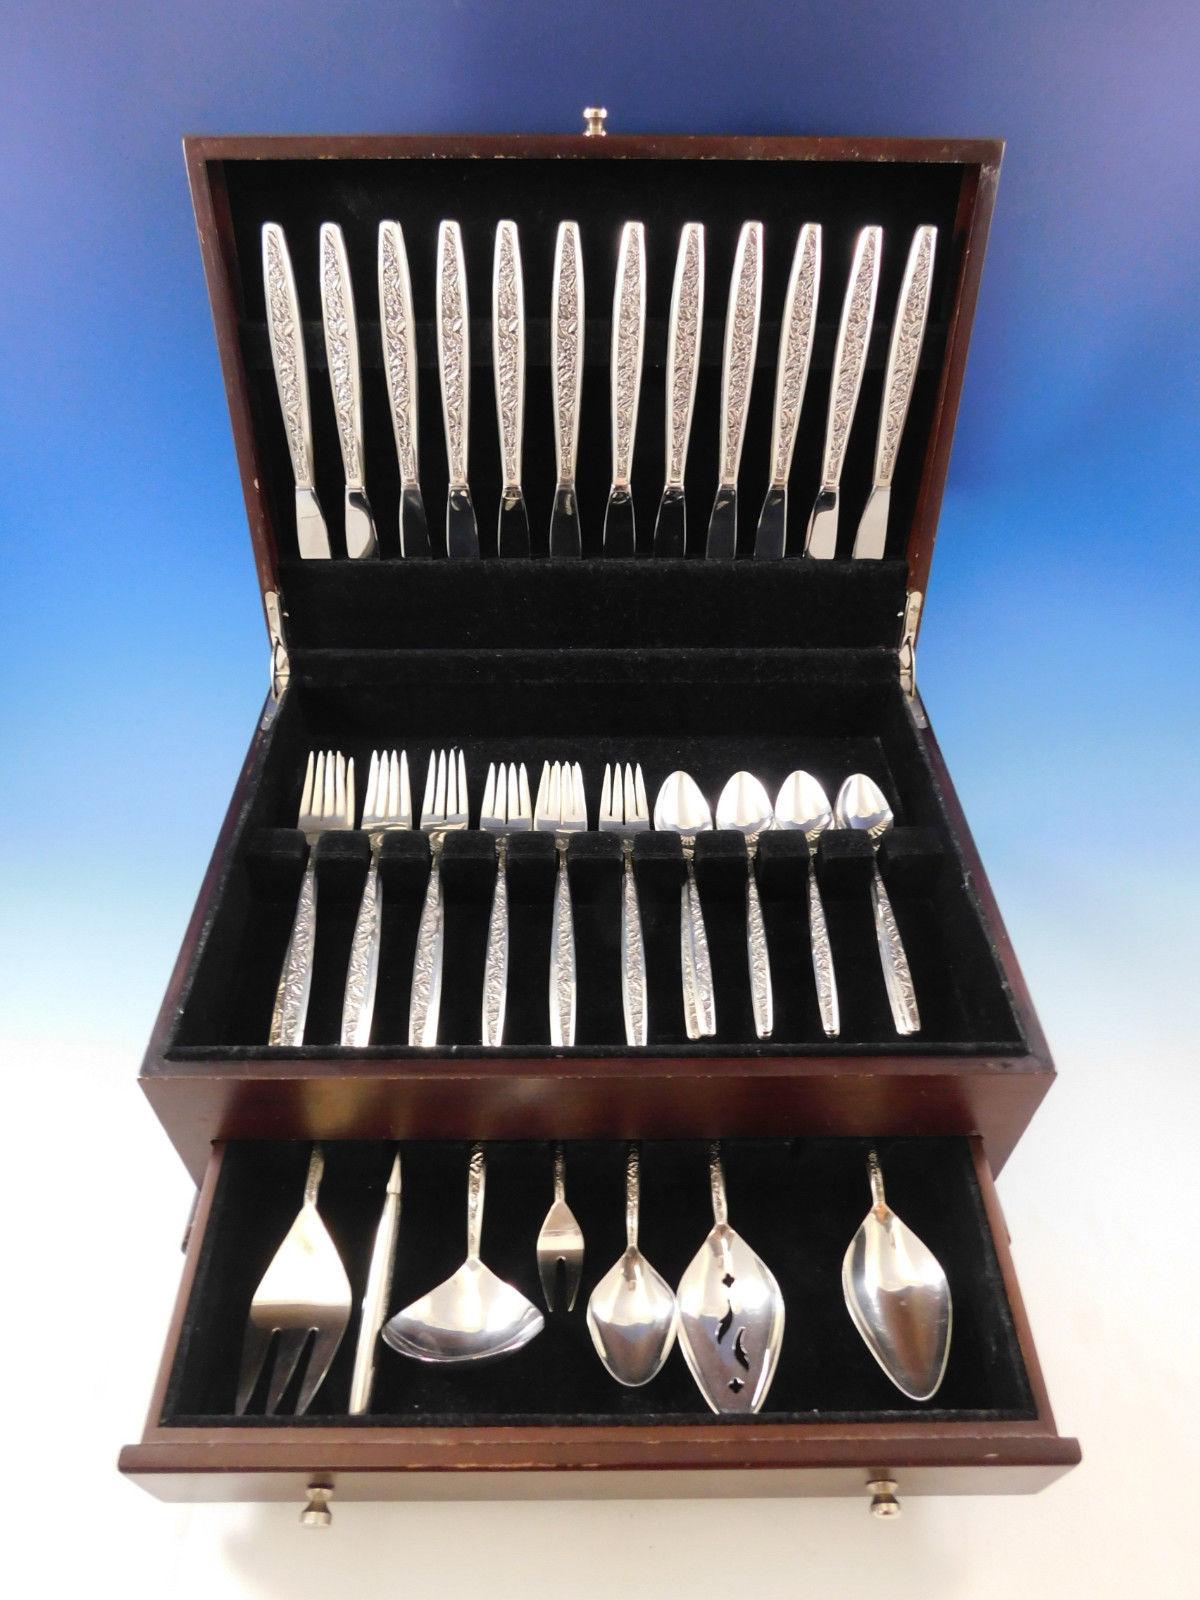 Superb Valencia by International sterling silver flatware set, 55 pieces. The Valencia pattern was introduced in the year 1964 and features a contemporary elongated handle with an all-over decorative floral and leaf pattern on the front. This set